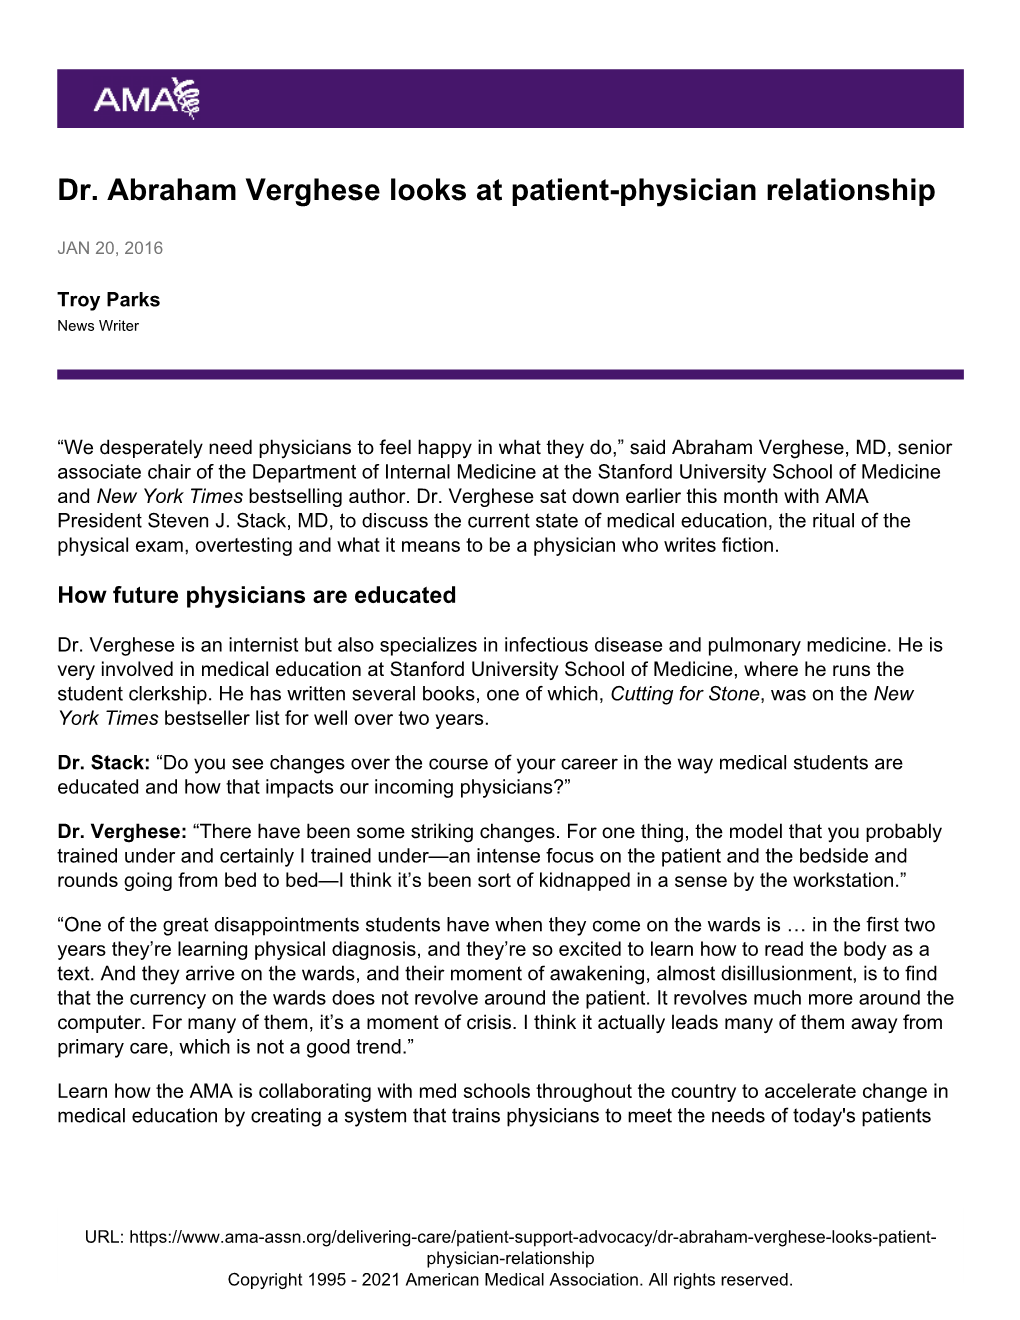 Dr. Abraham Verghese Looks at Patient-Physician Relationship